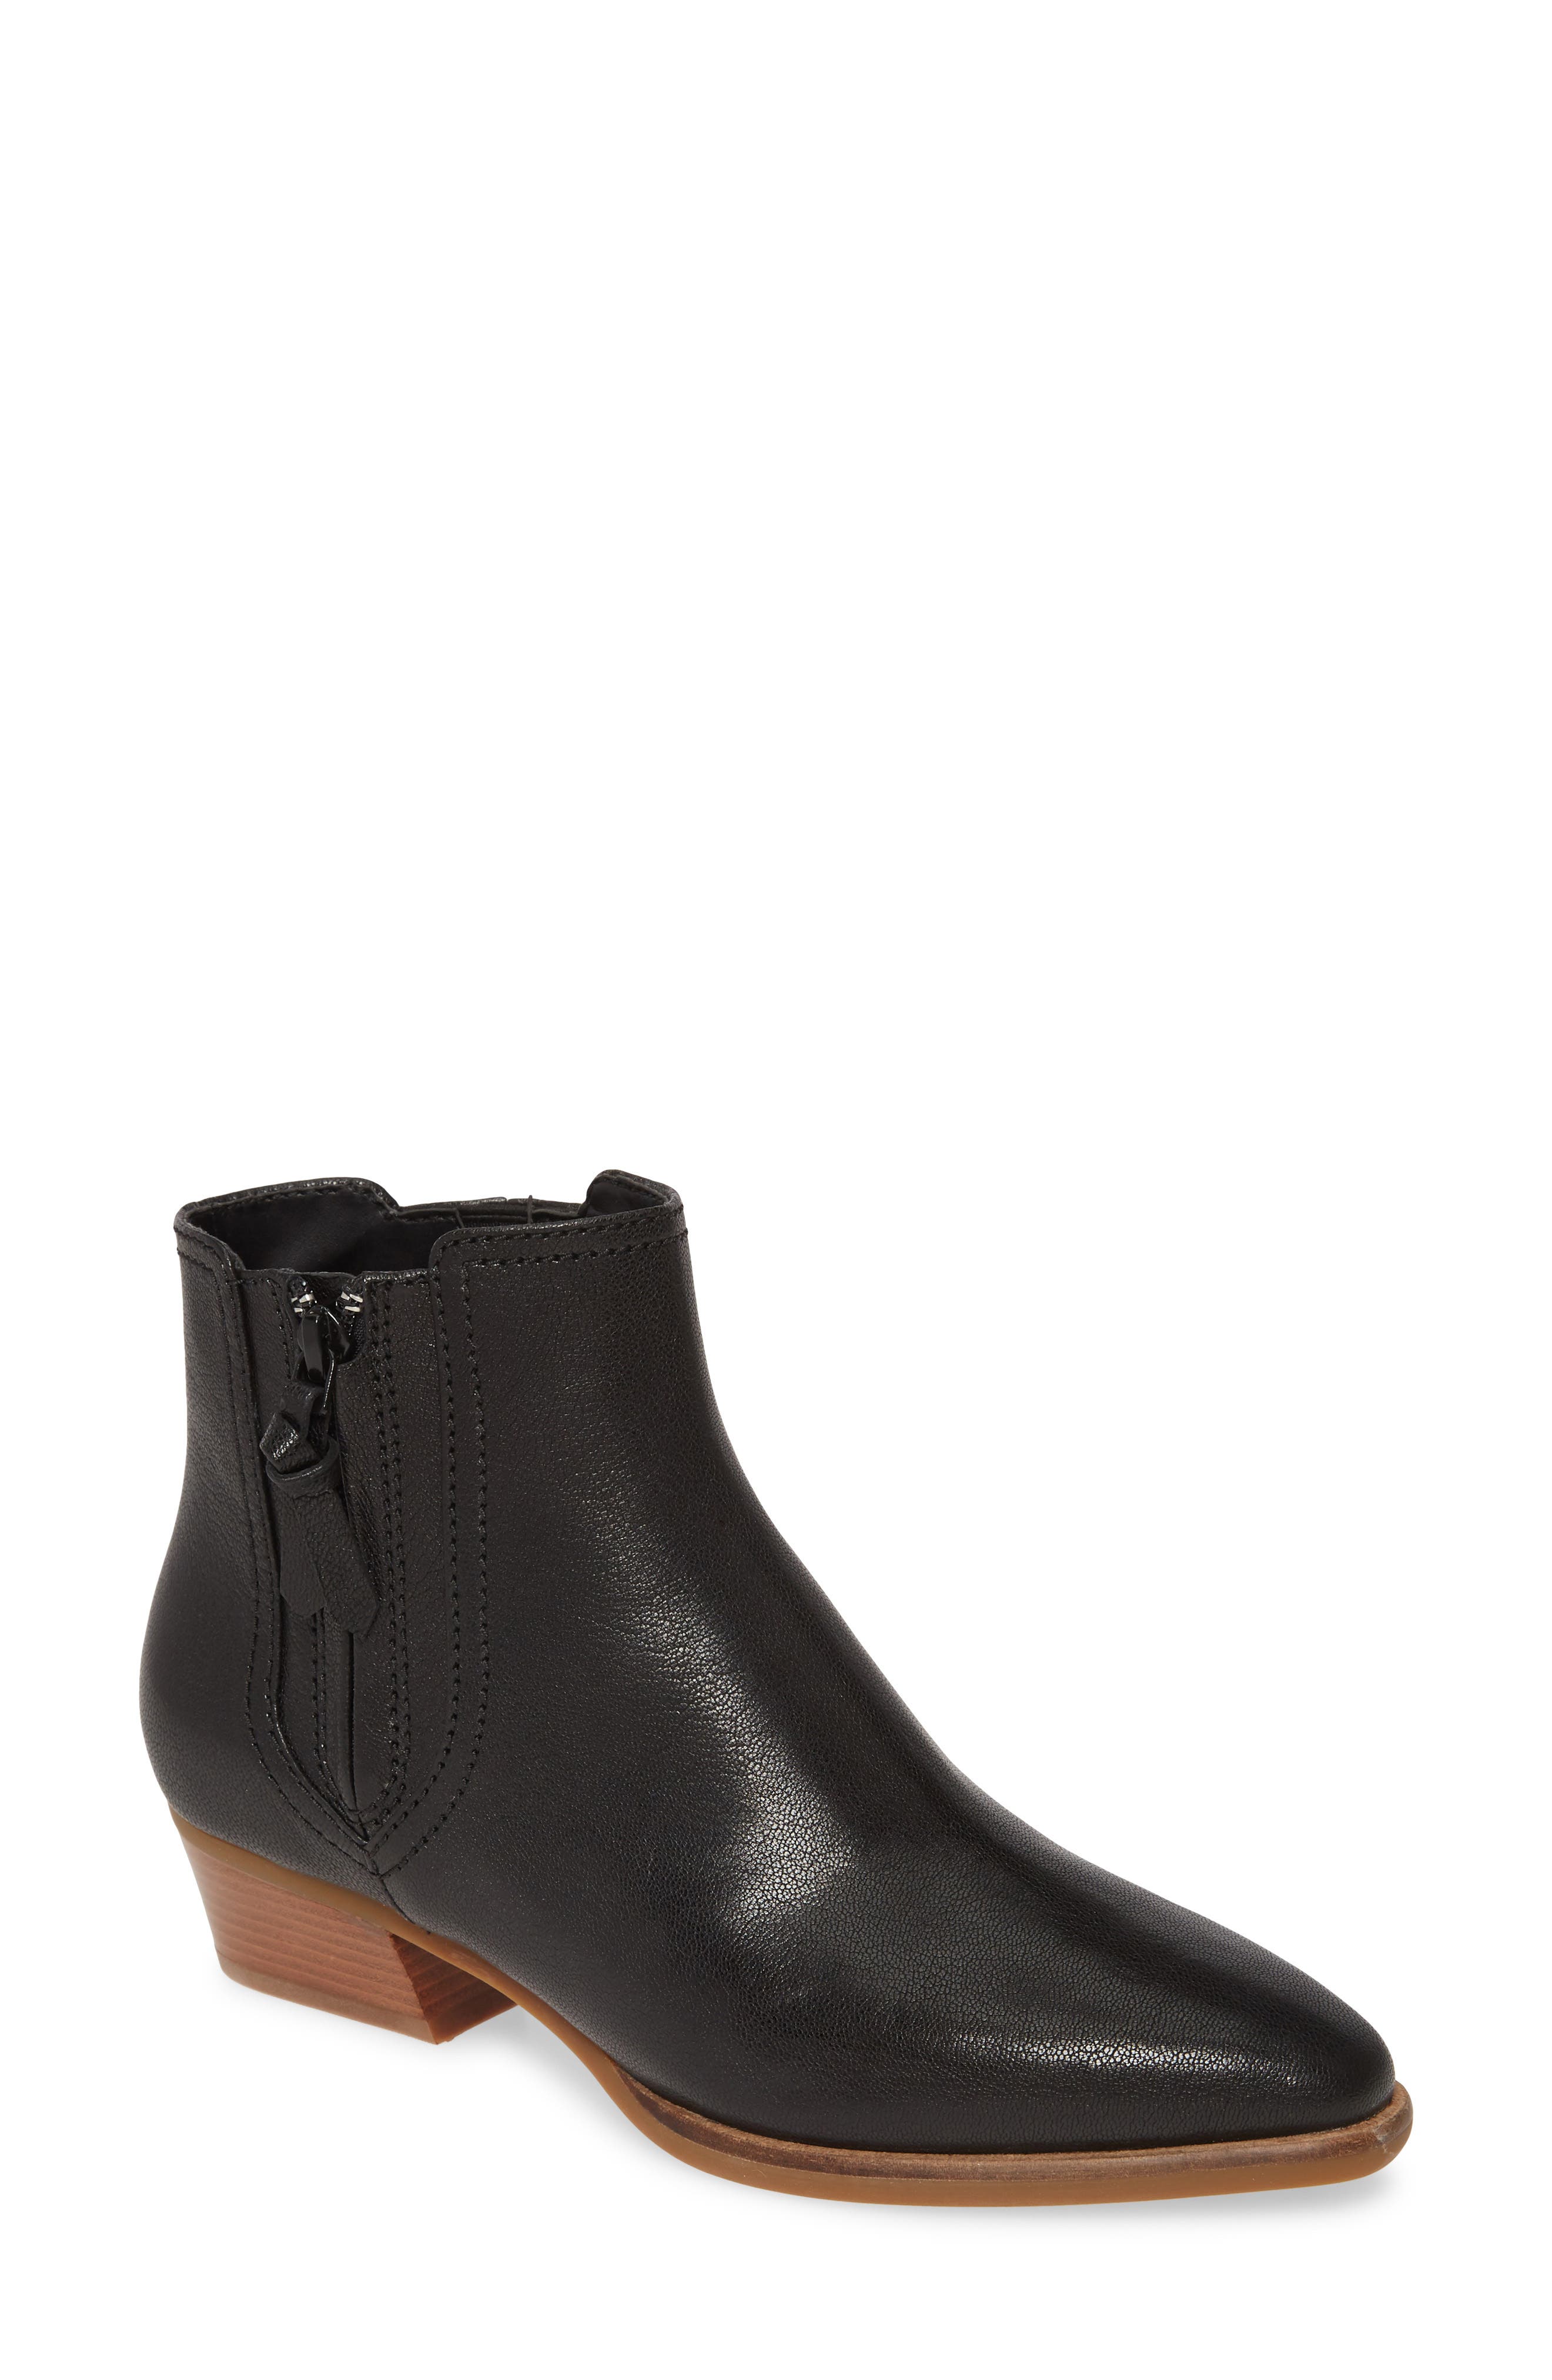 black leather boots nordstrom